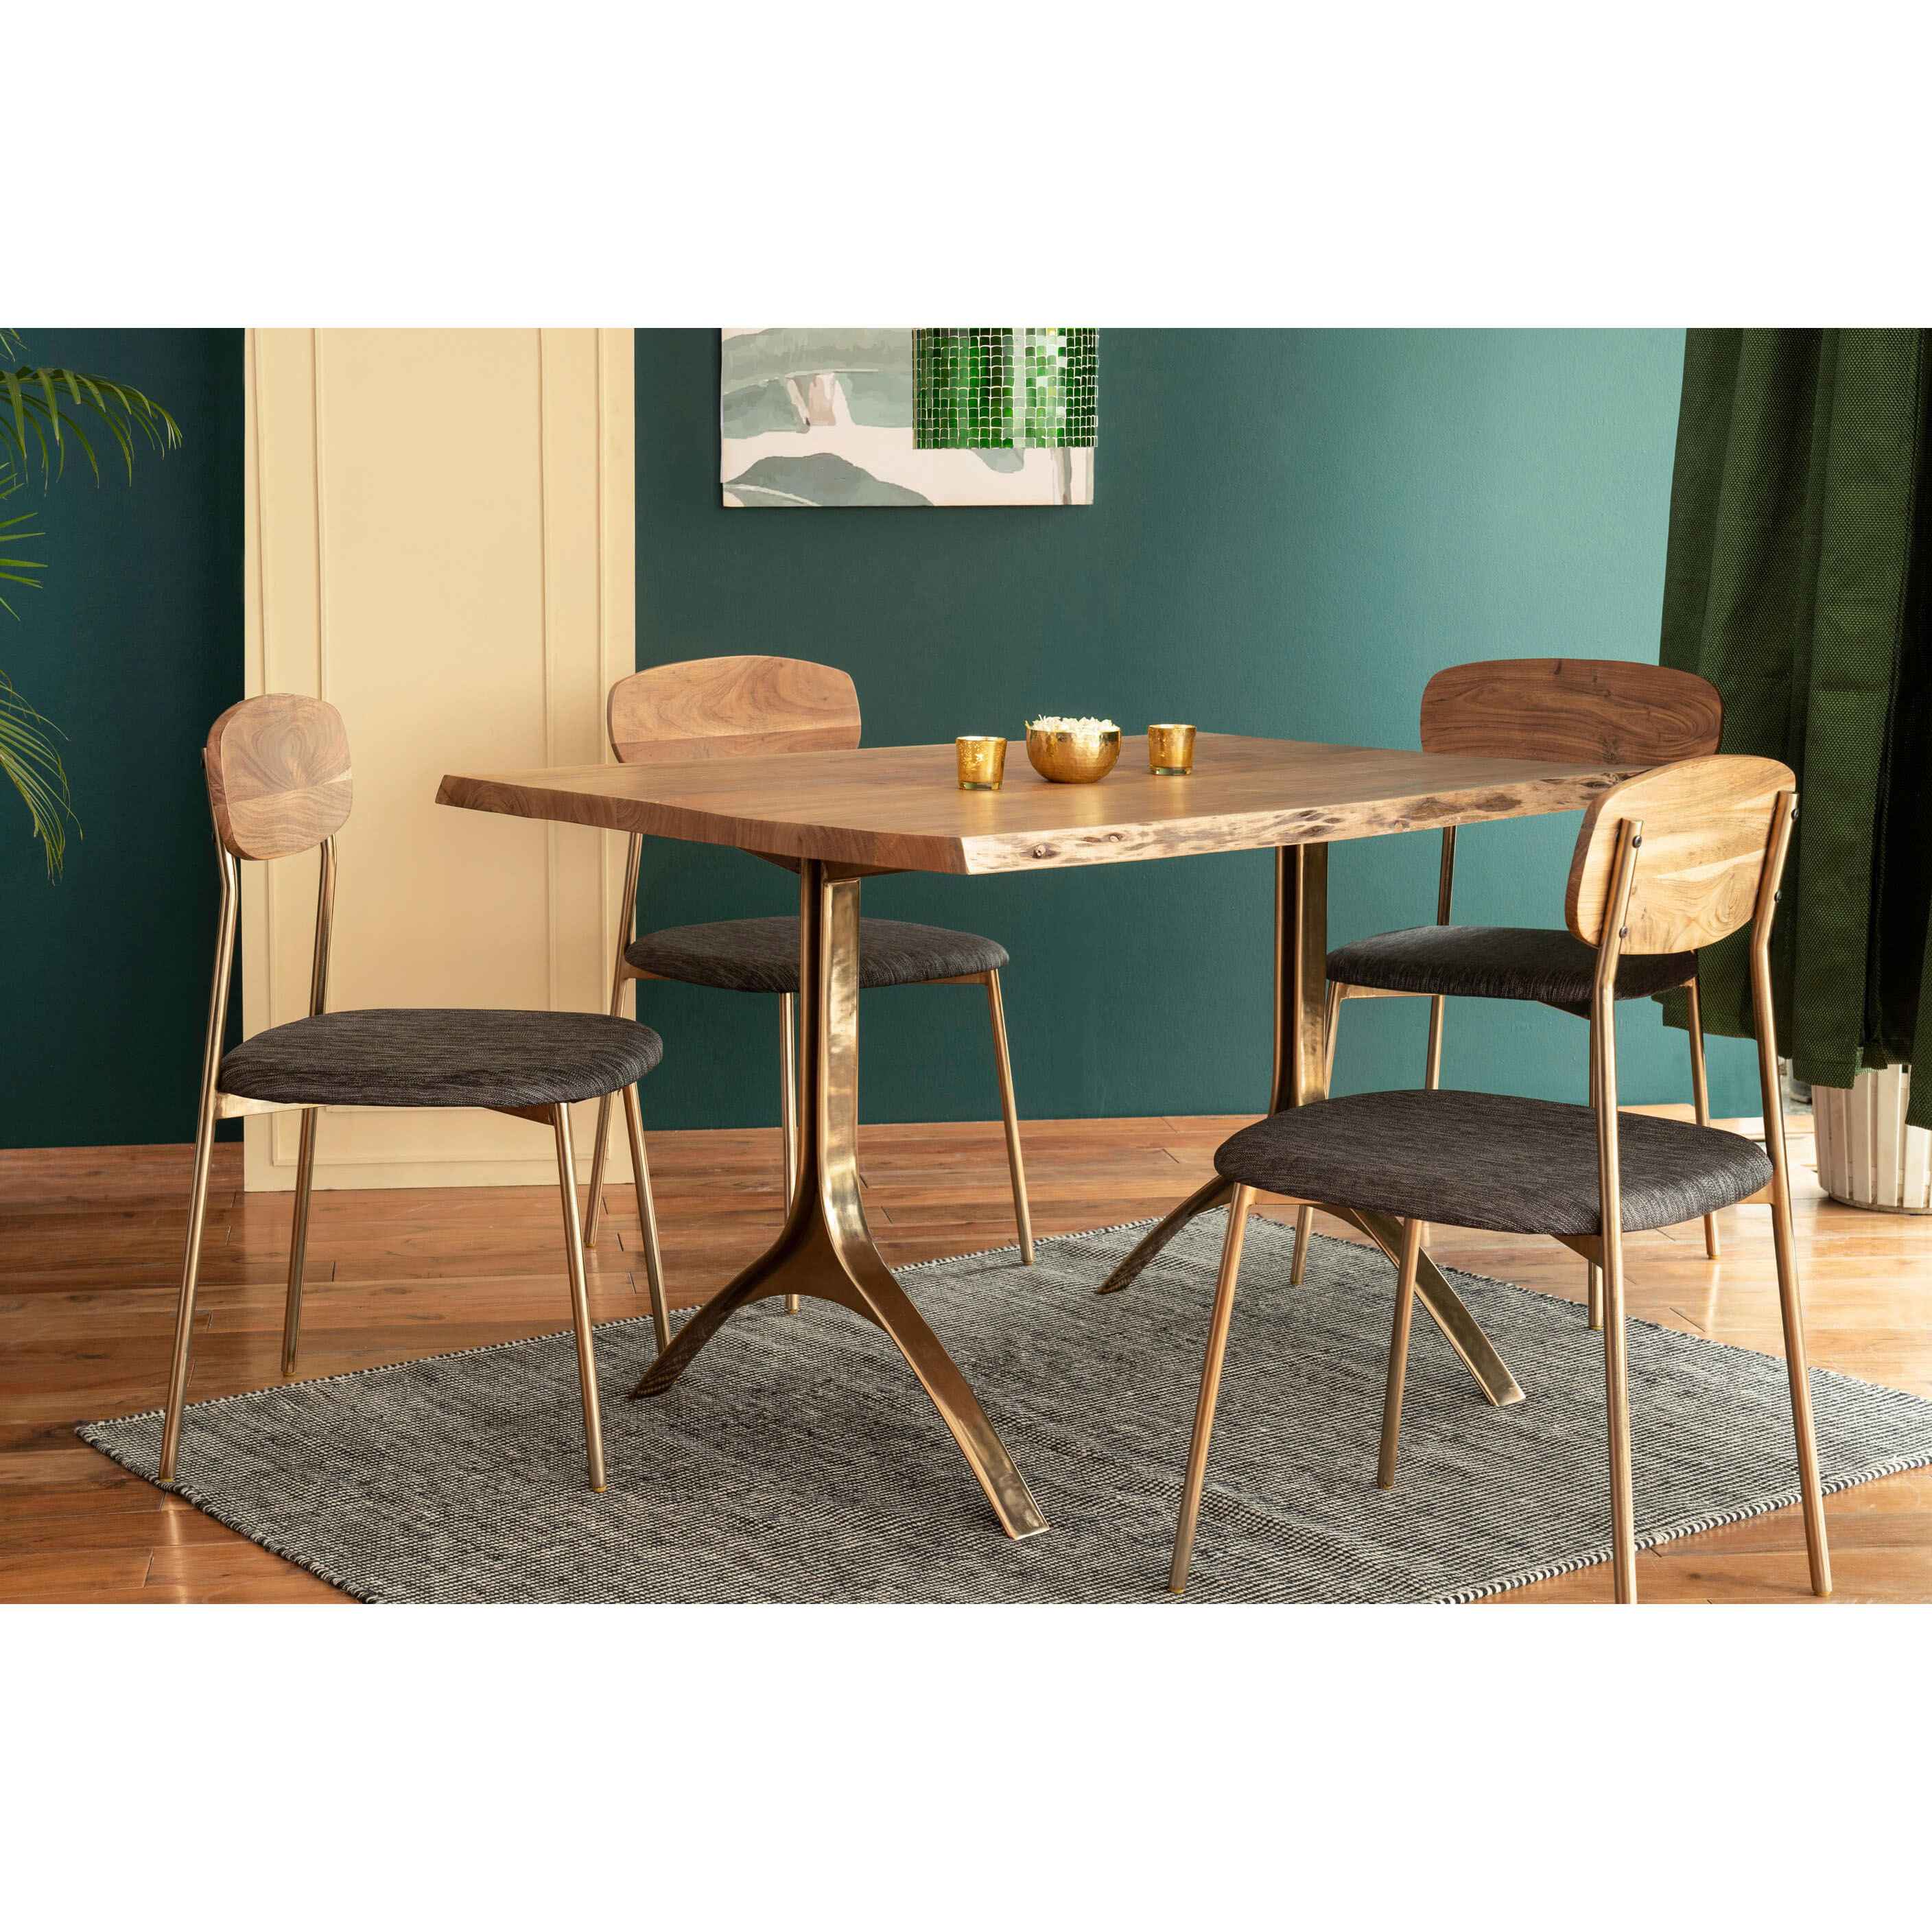 Mazi Dining Table With 6 Chairs